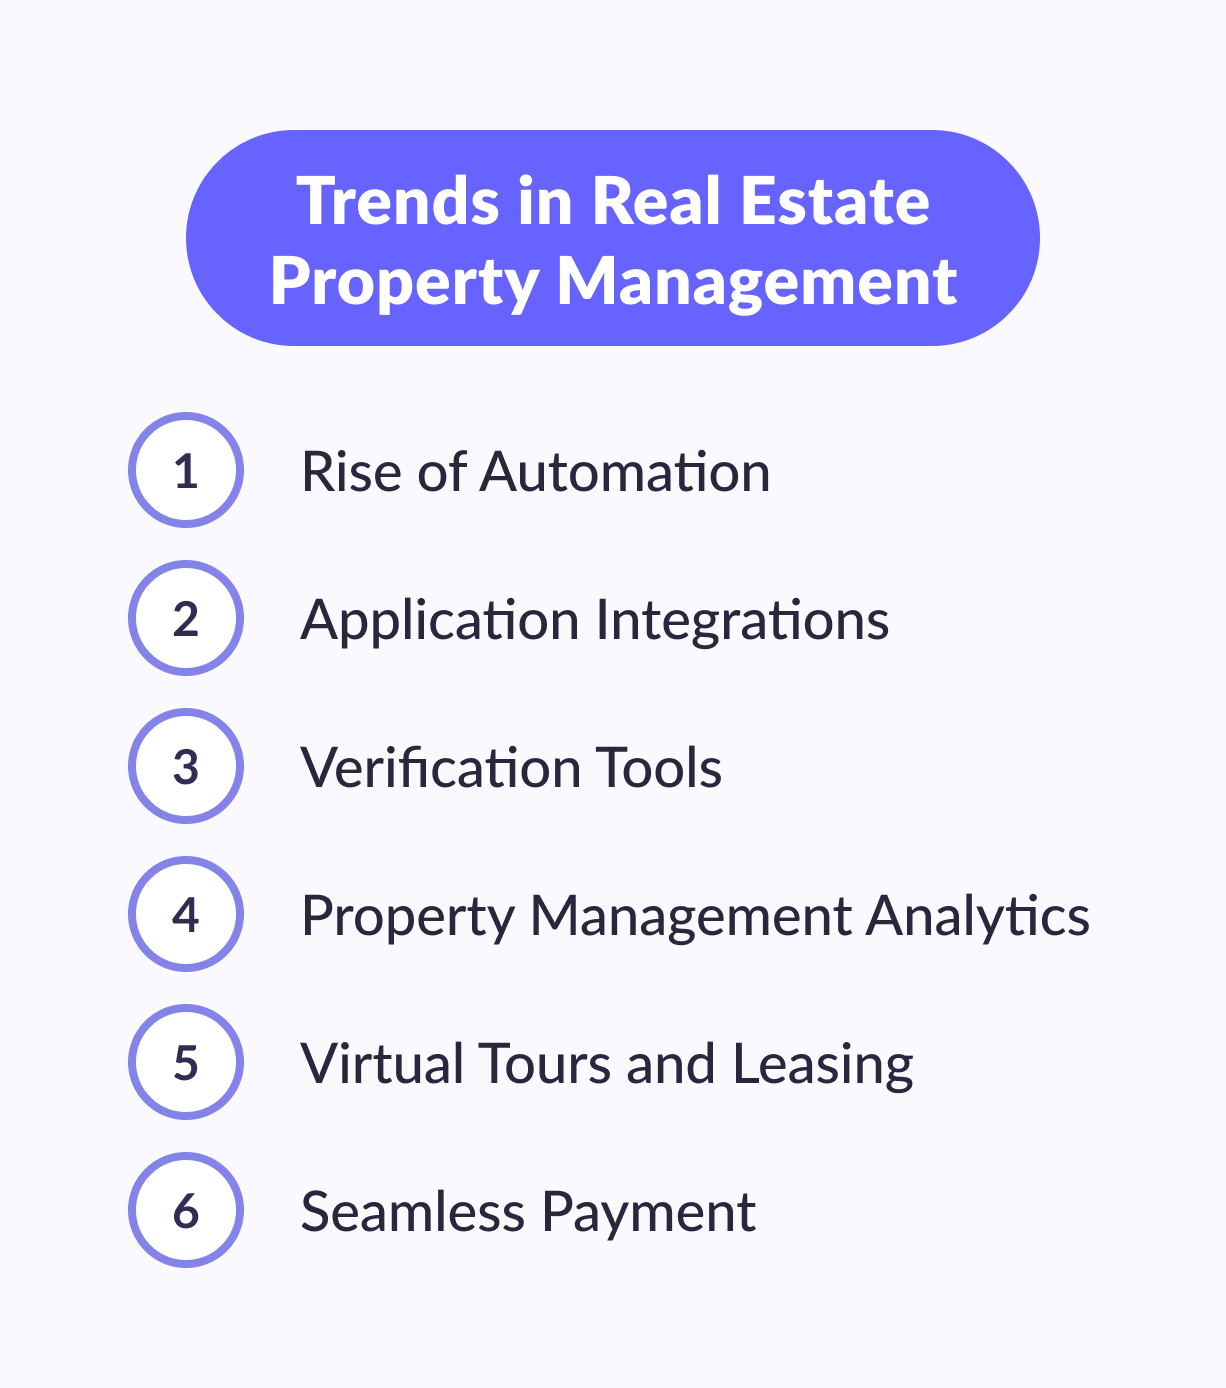 Trends in real estate property management